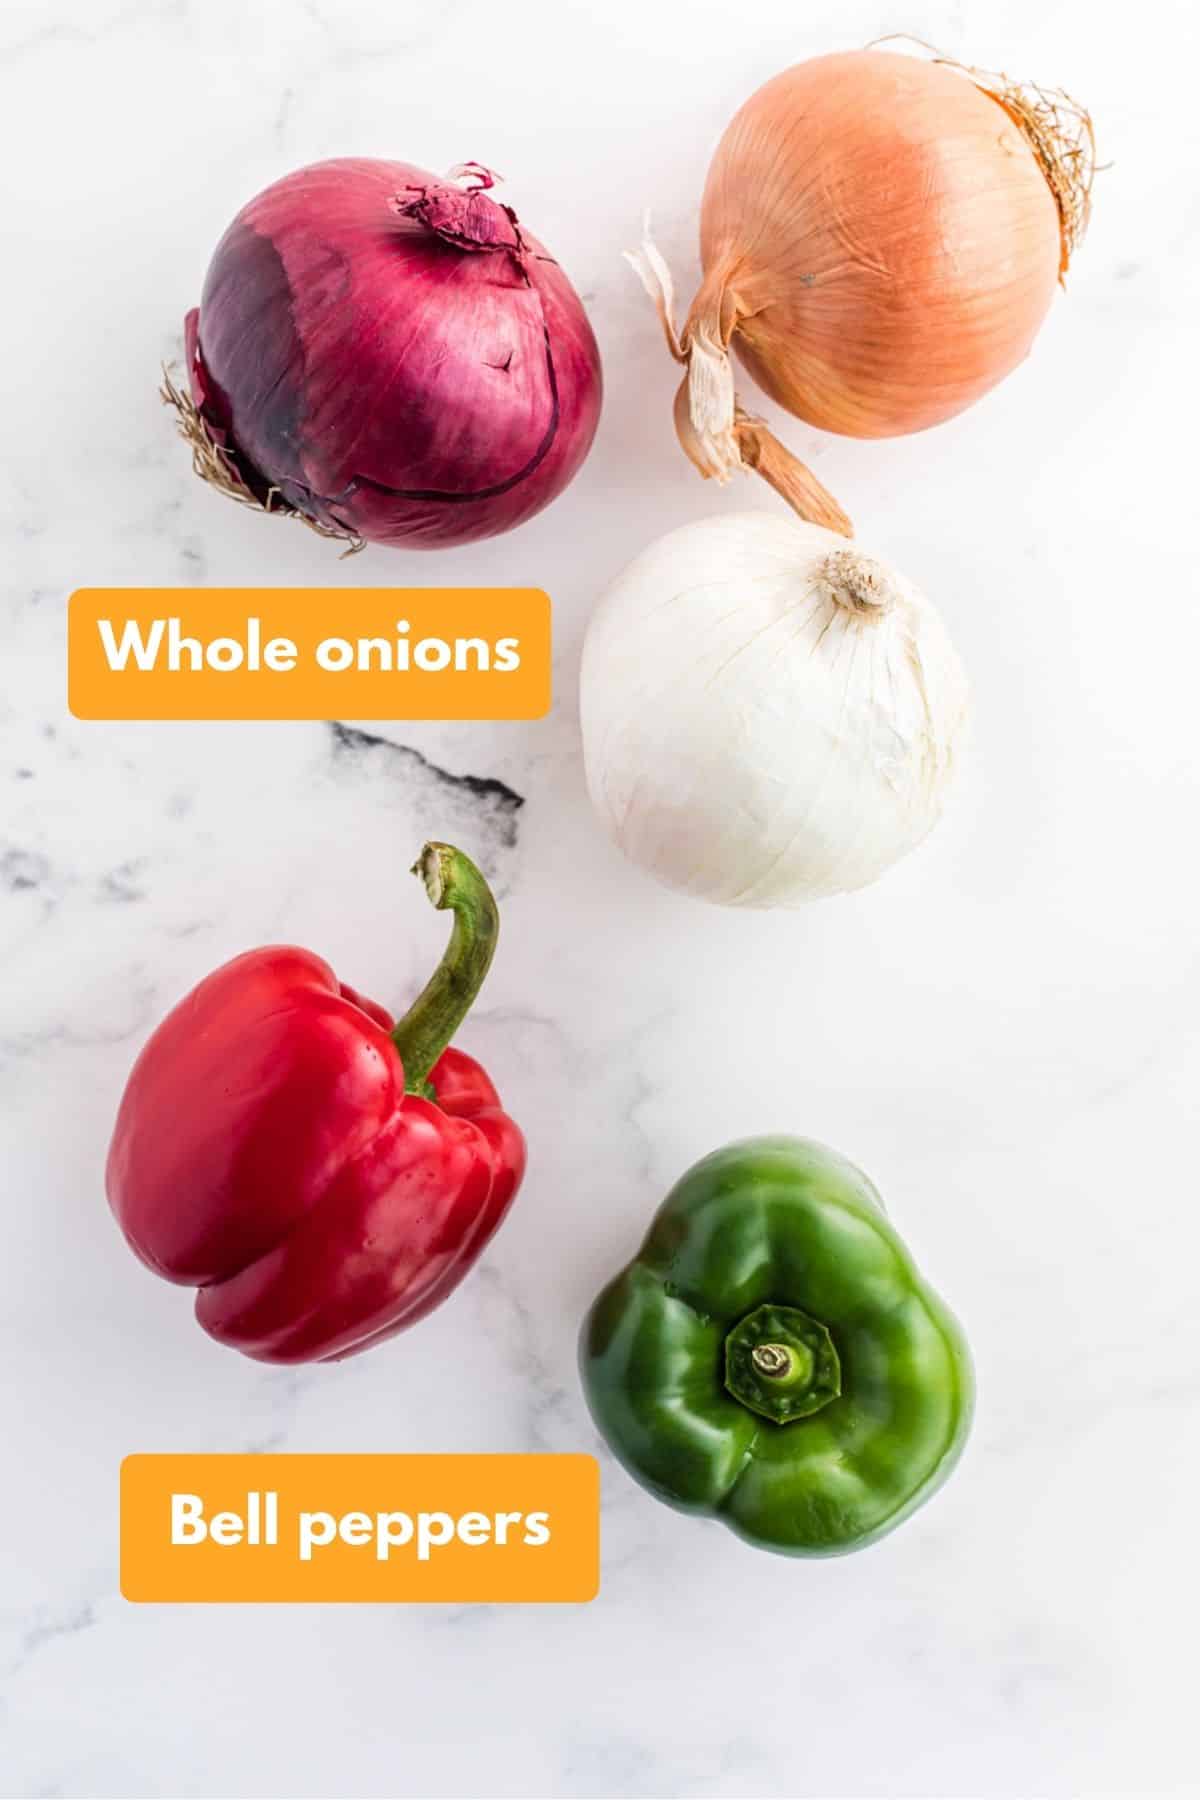 Whole onions and bell peppers